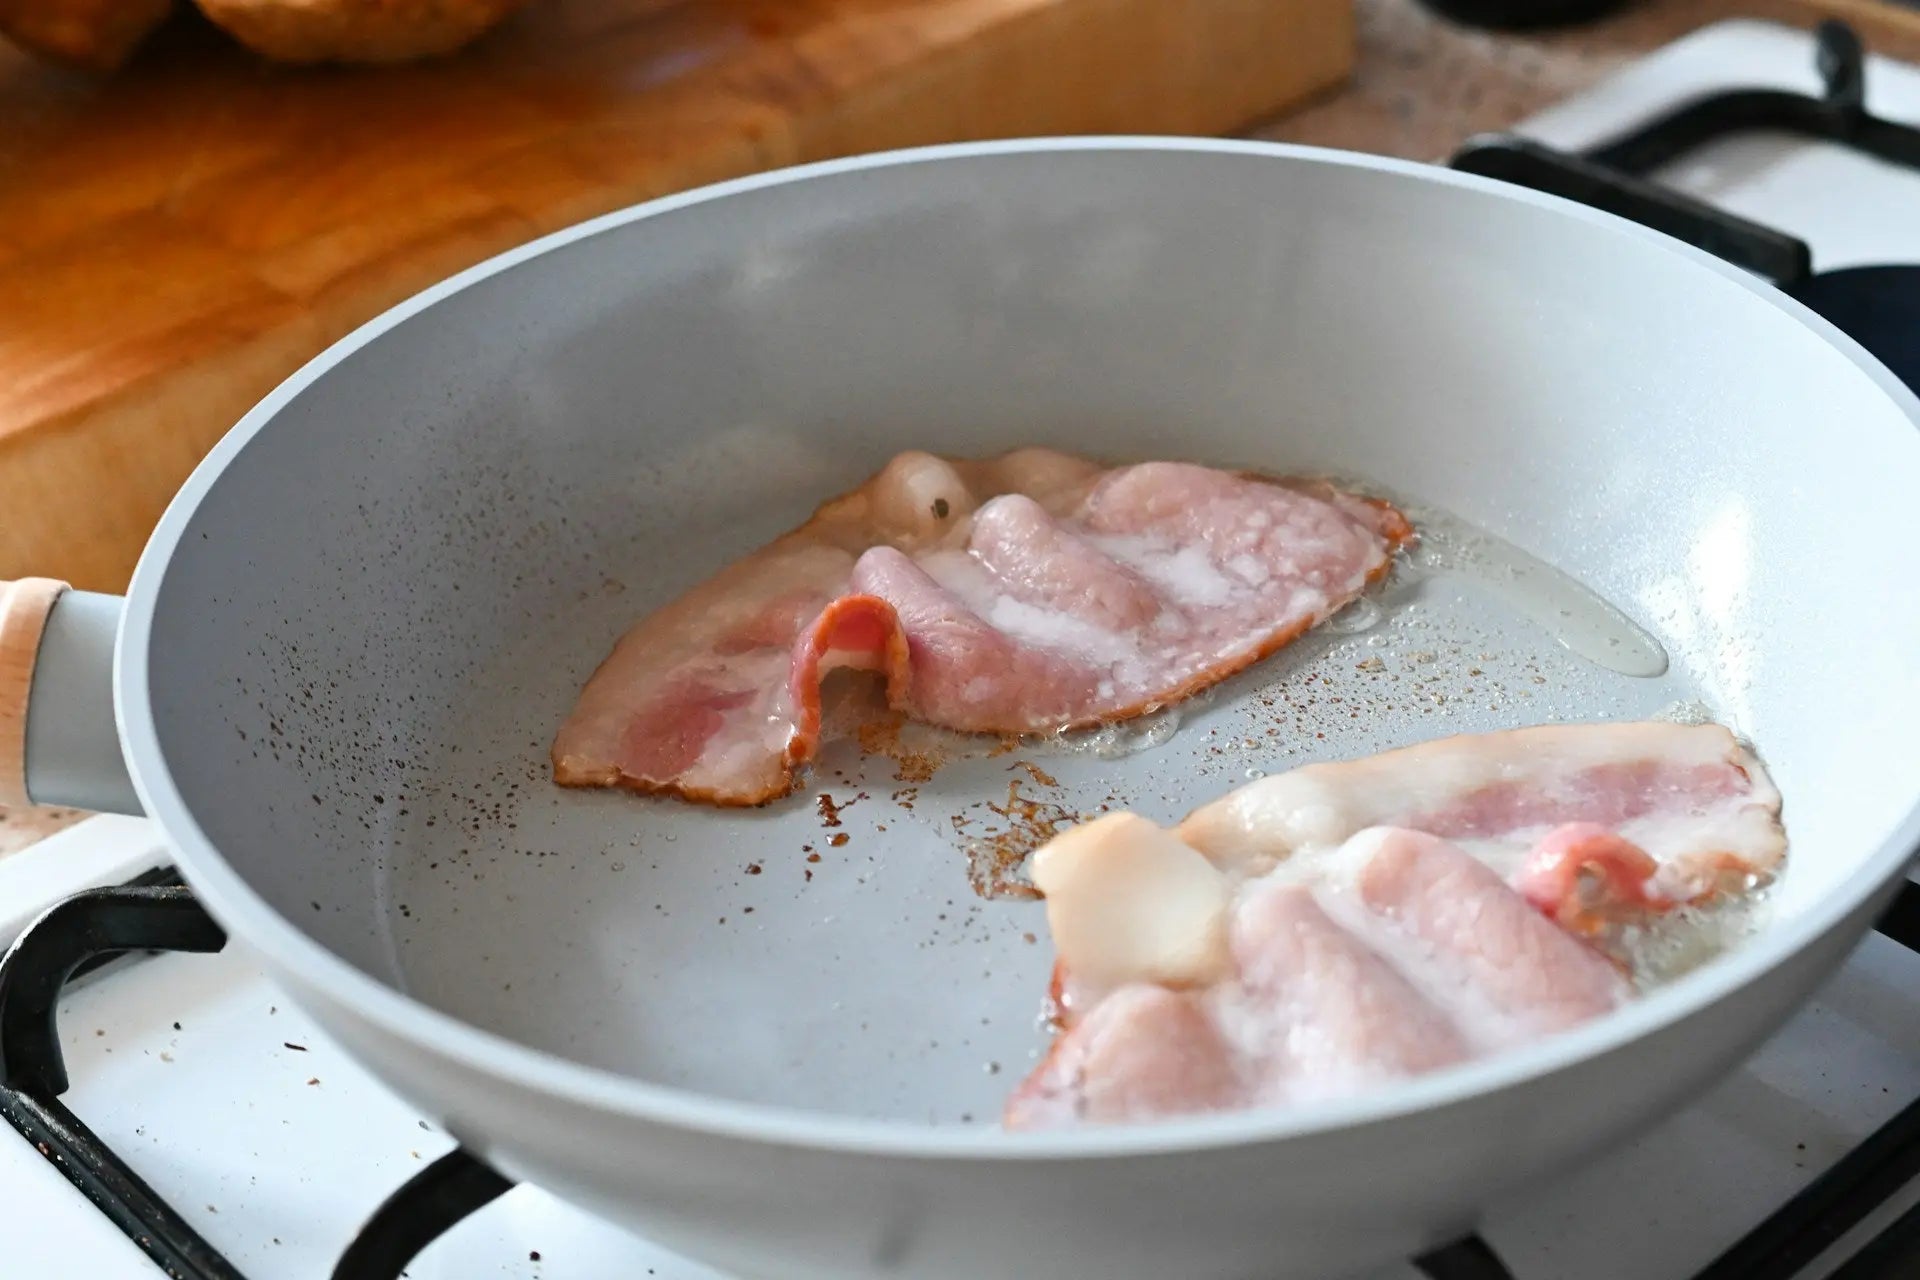 How-Long-Can-Pre-Cooked-Bacon-Last-In-The-Fridge | Fridge.com